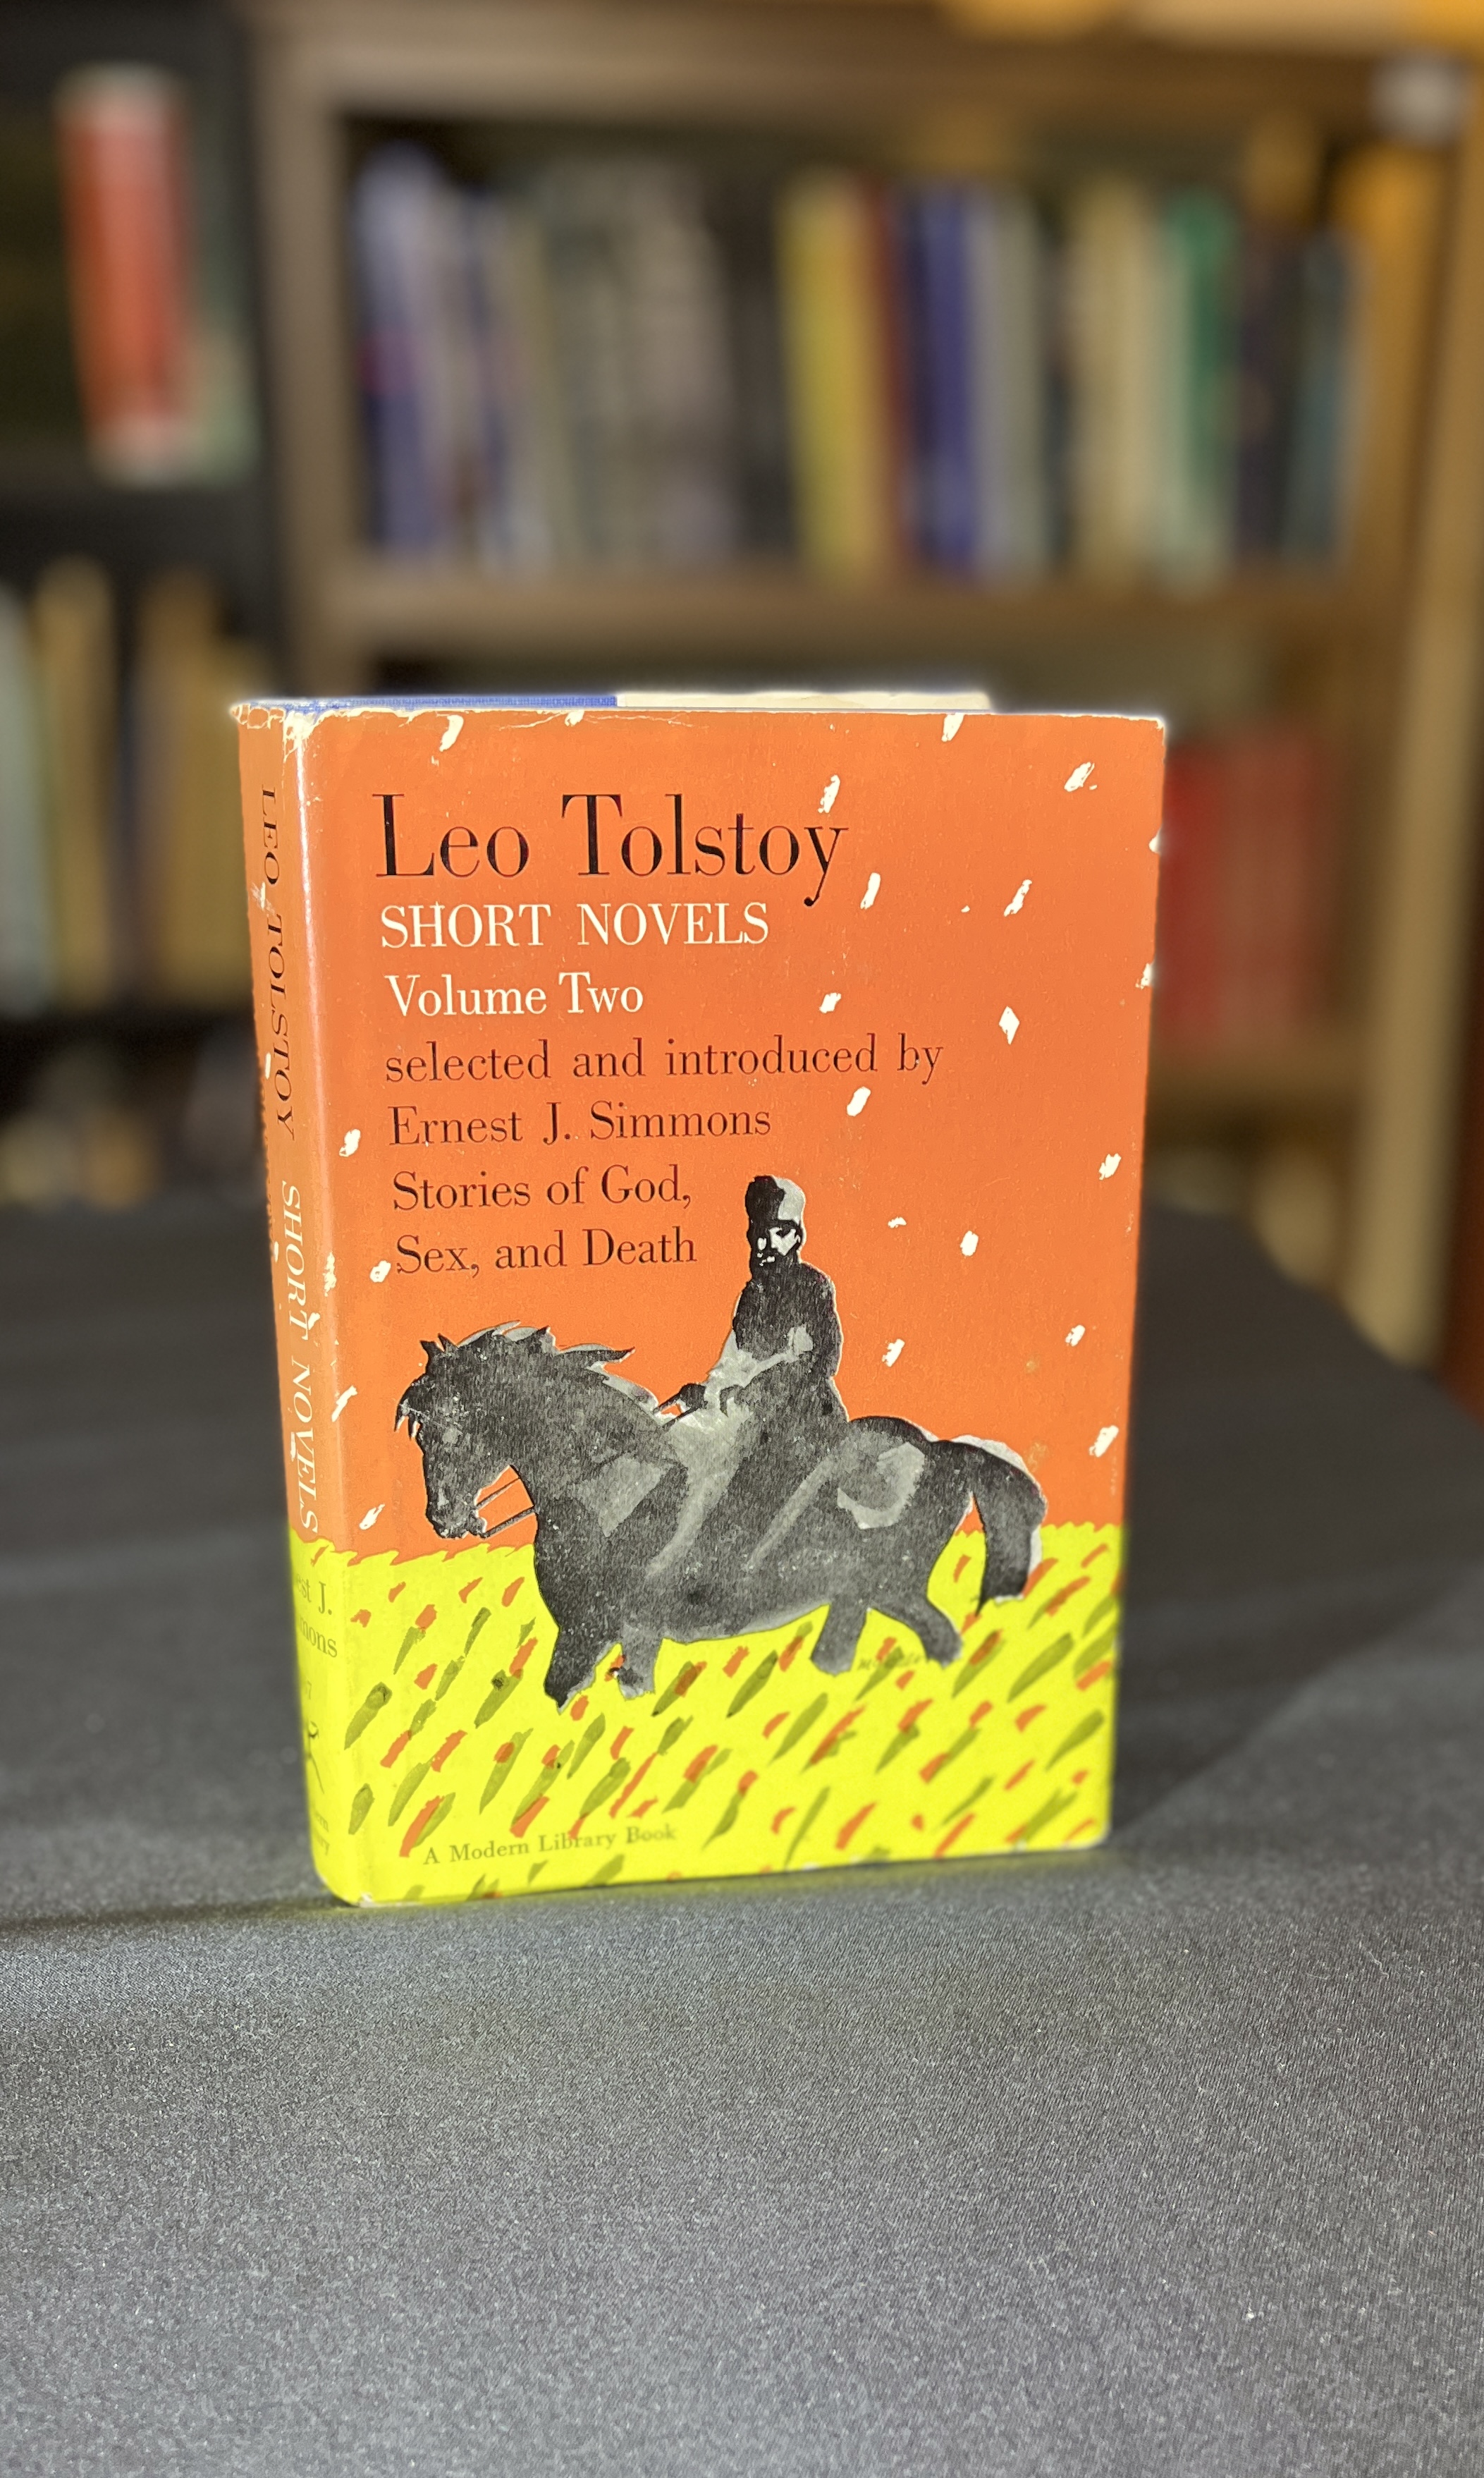 Image for "Leo Tolstoy: Short Novels; Stories of Love, Seduction, and Peasant Life"